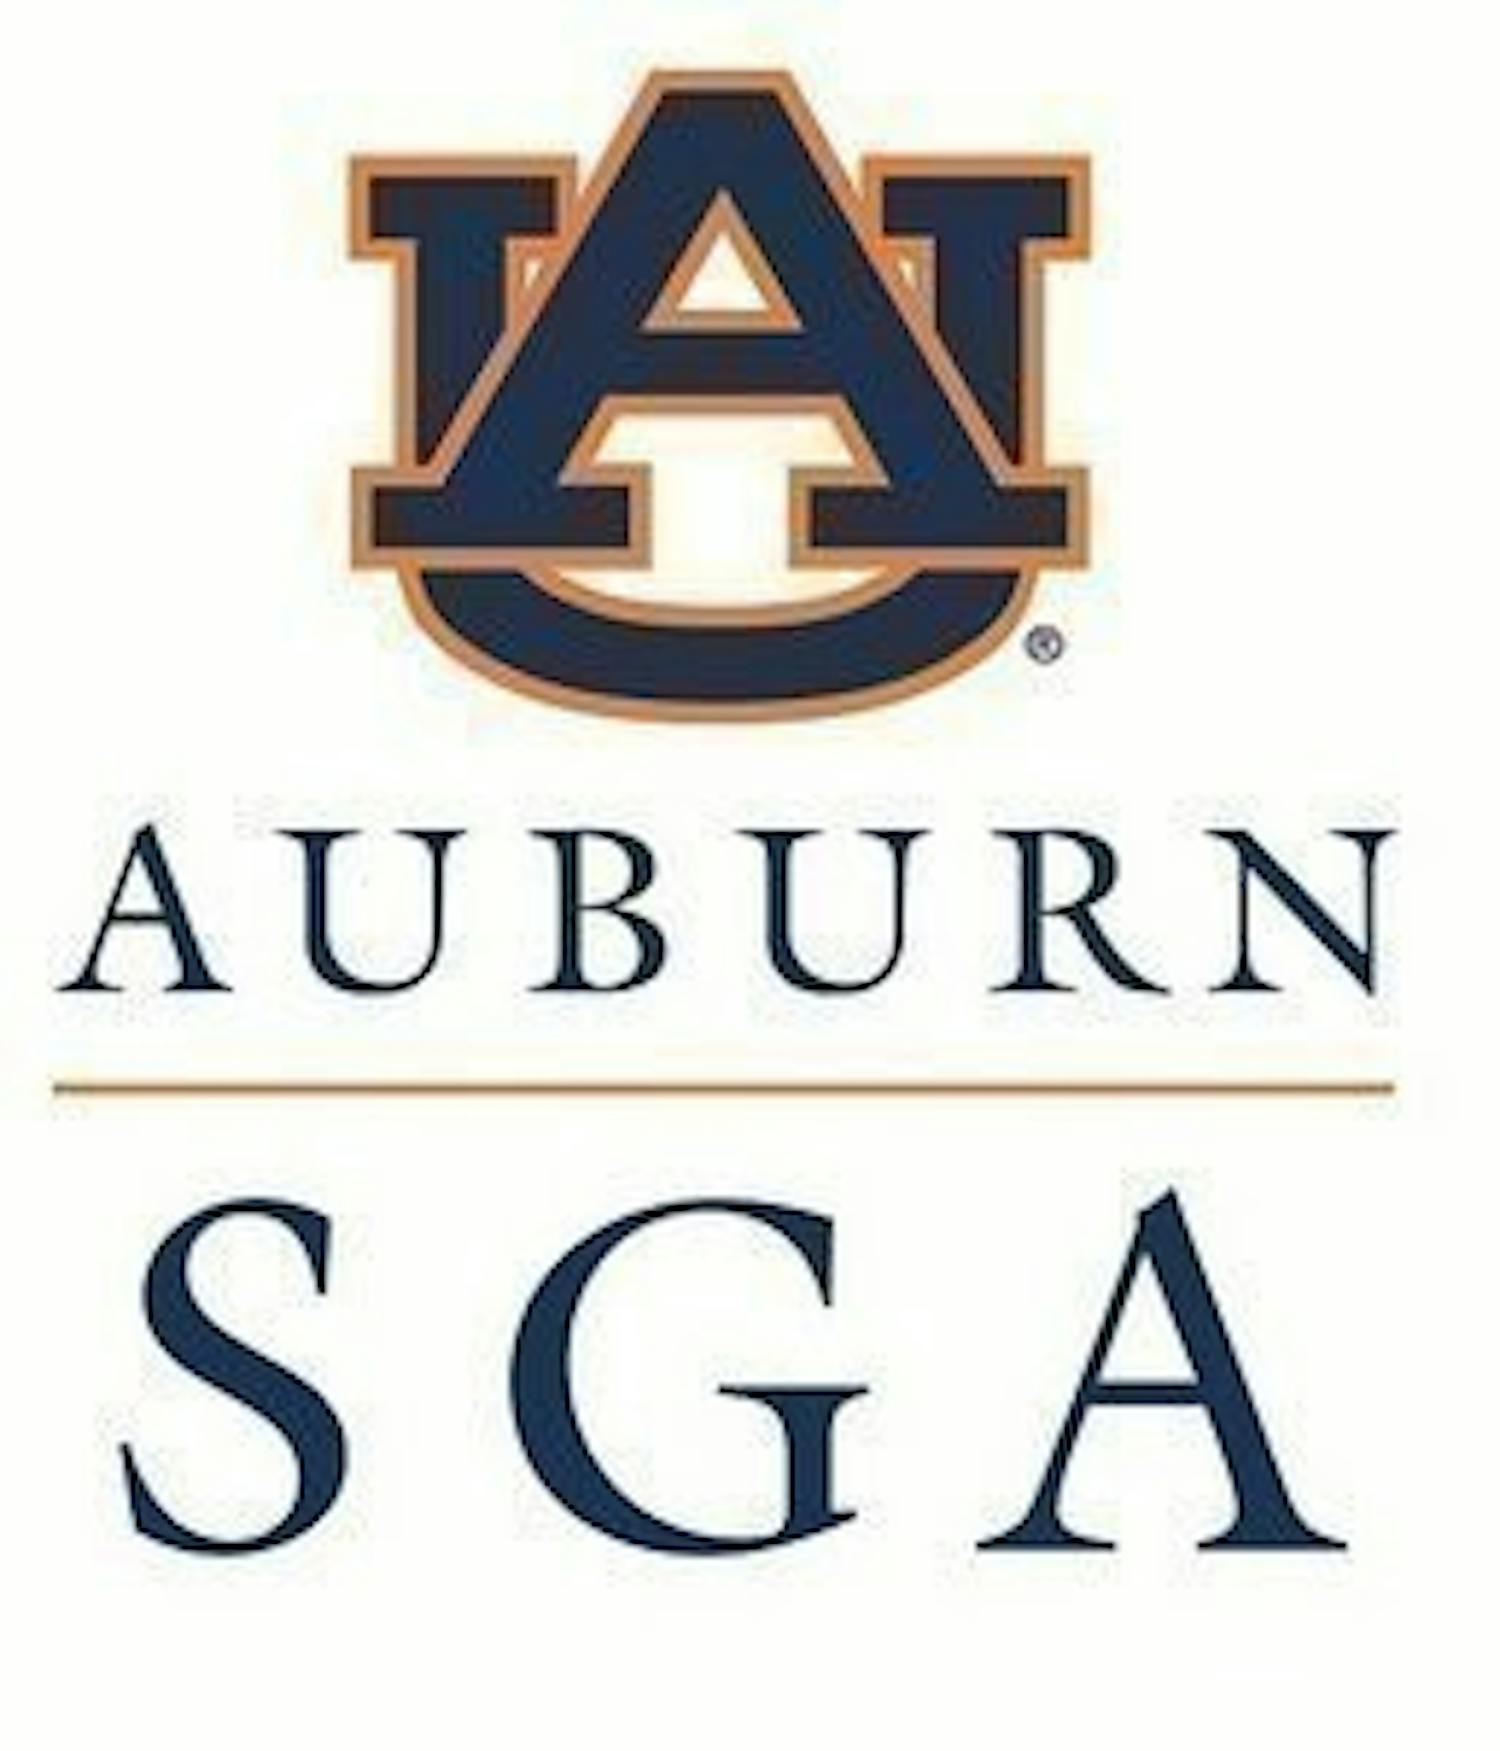 SGA appoints two remaining executive officers